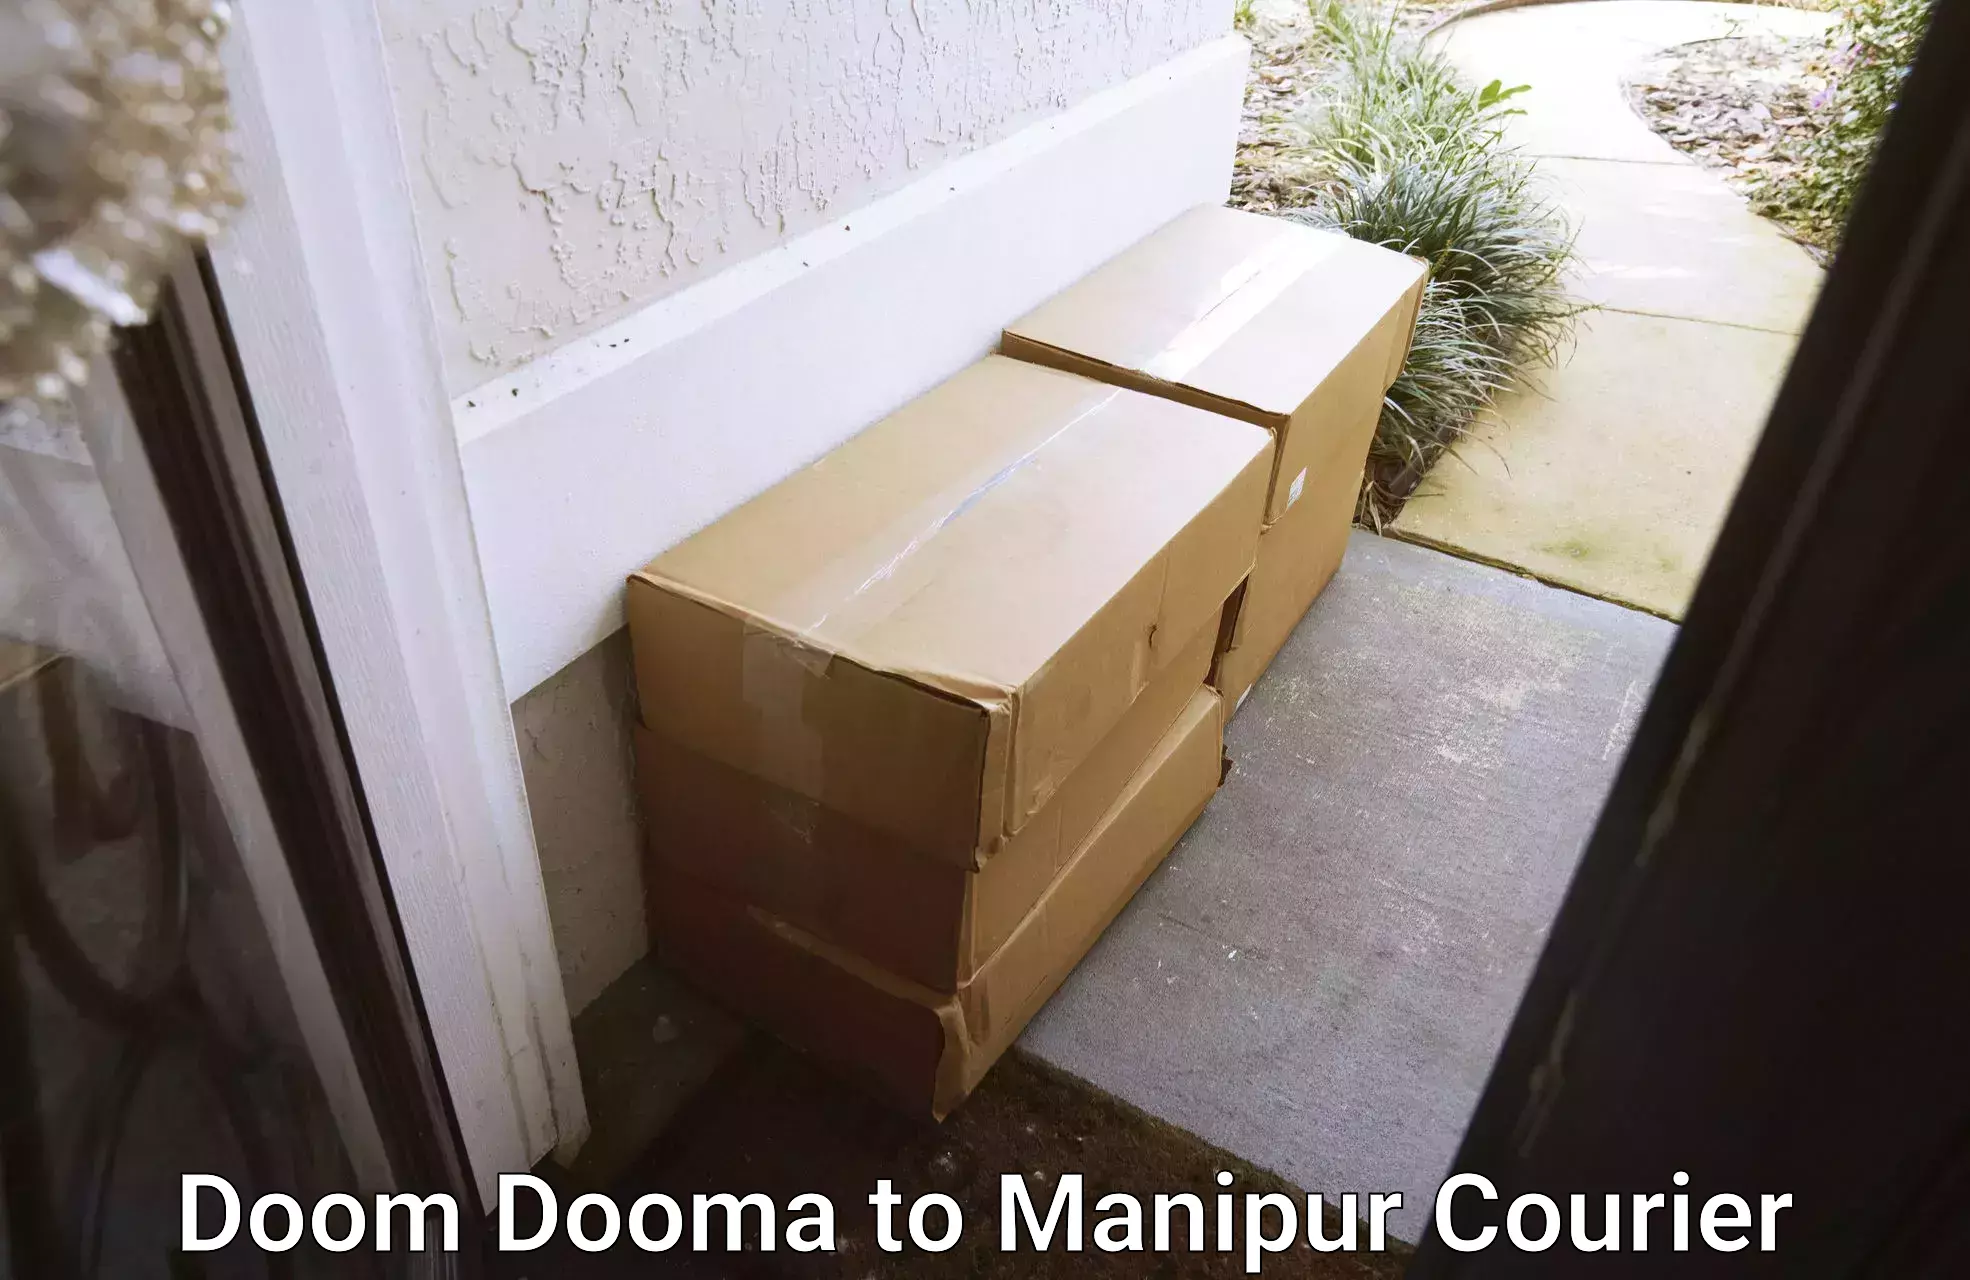 Same-day delivery solutions Doom Dooma to Manipur